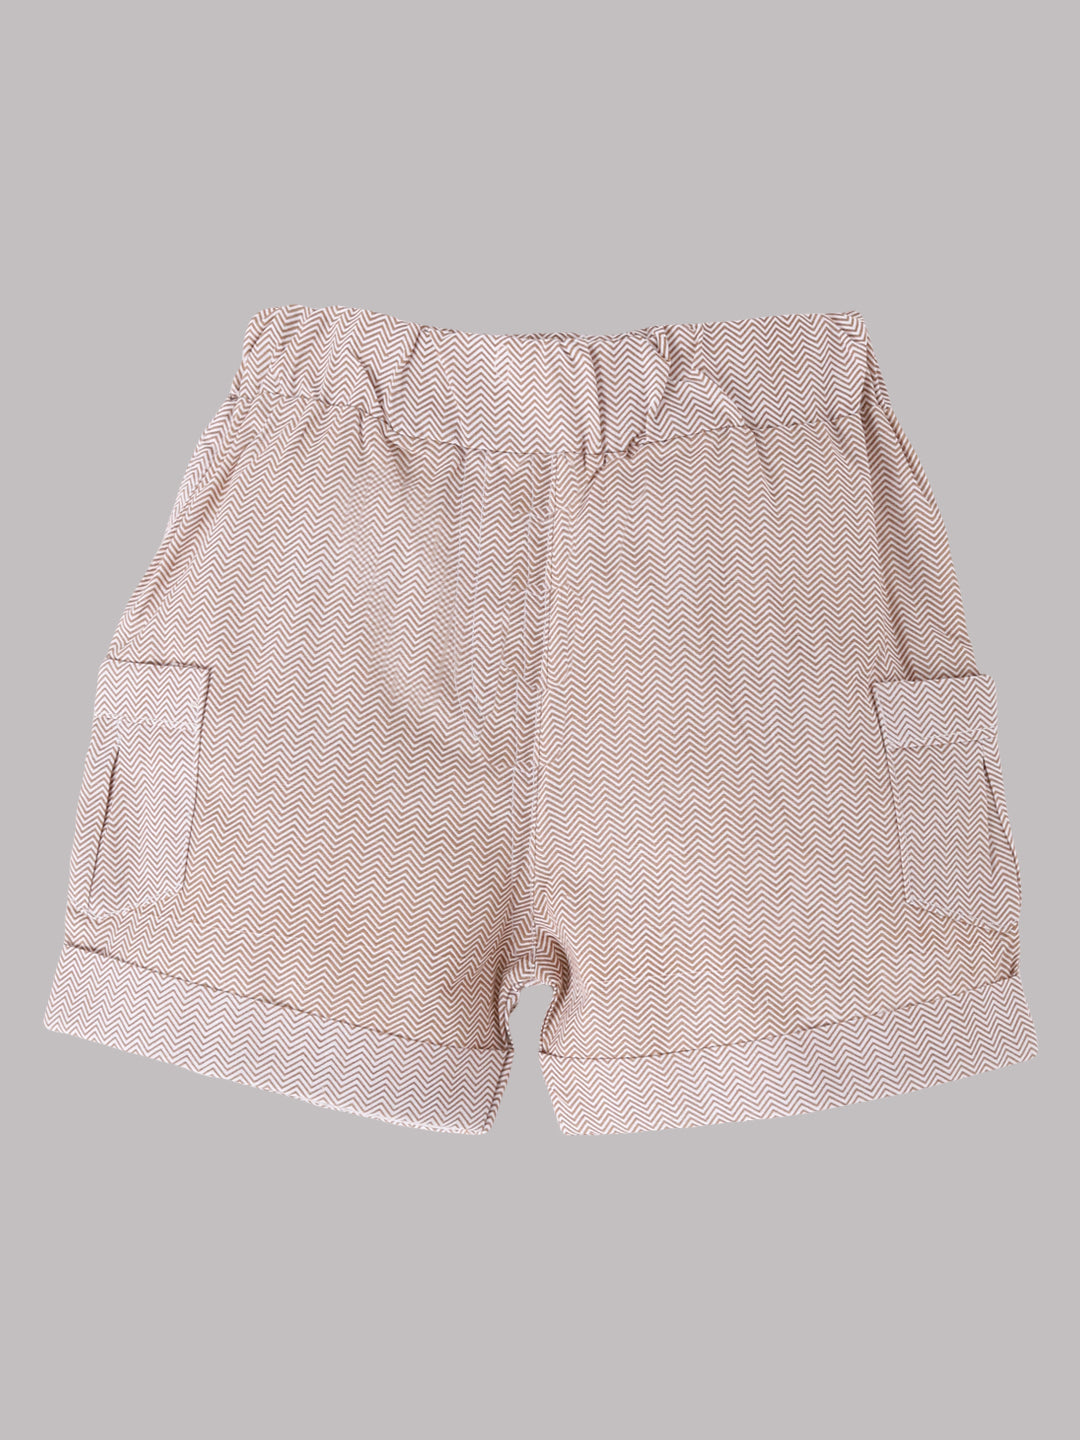 Half T-shirt and Shorts Set for Baby Boys 100% pure cotton-BEIGE